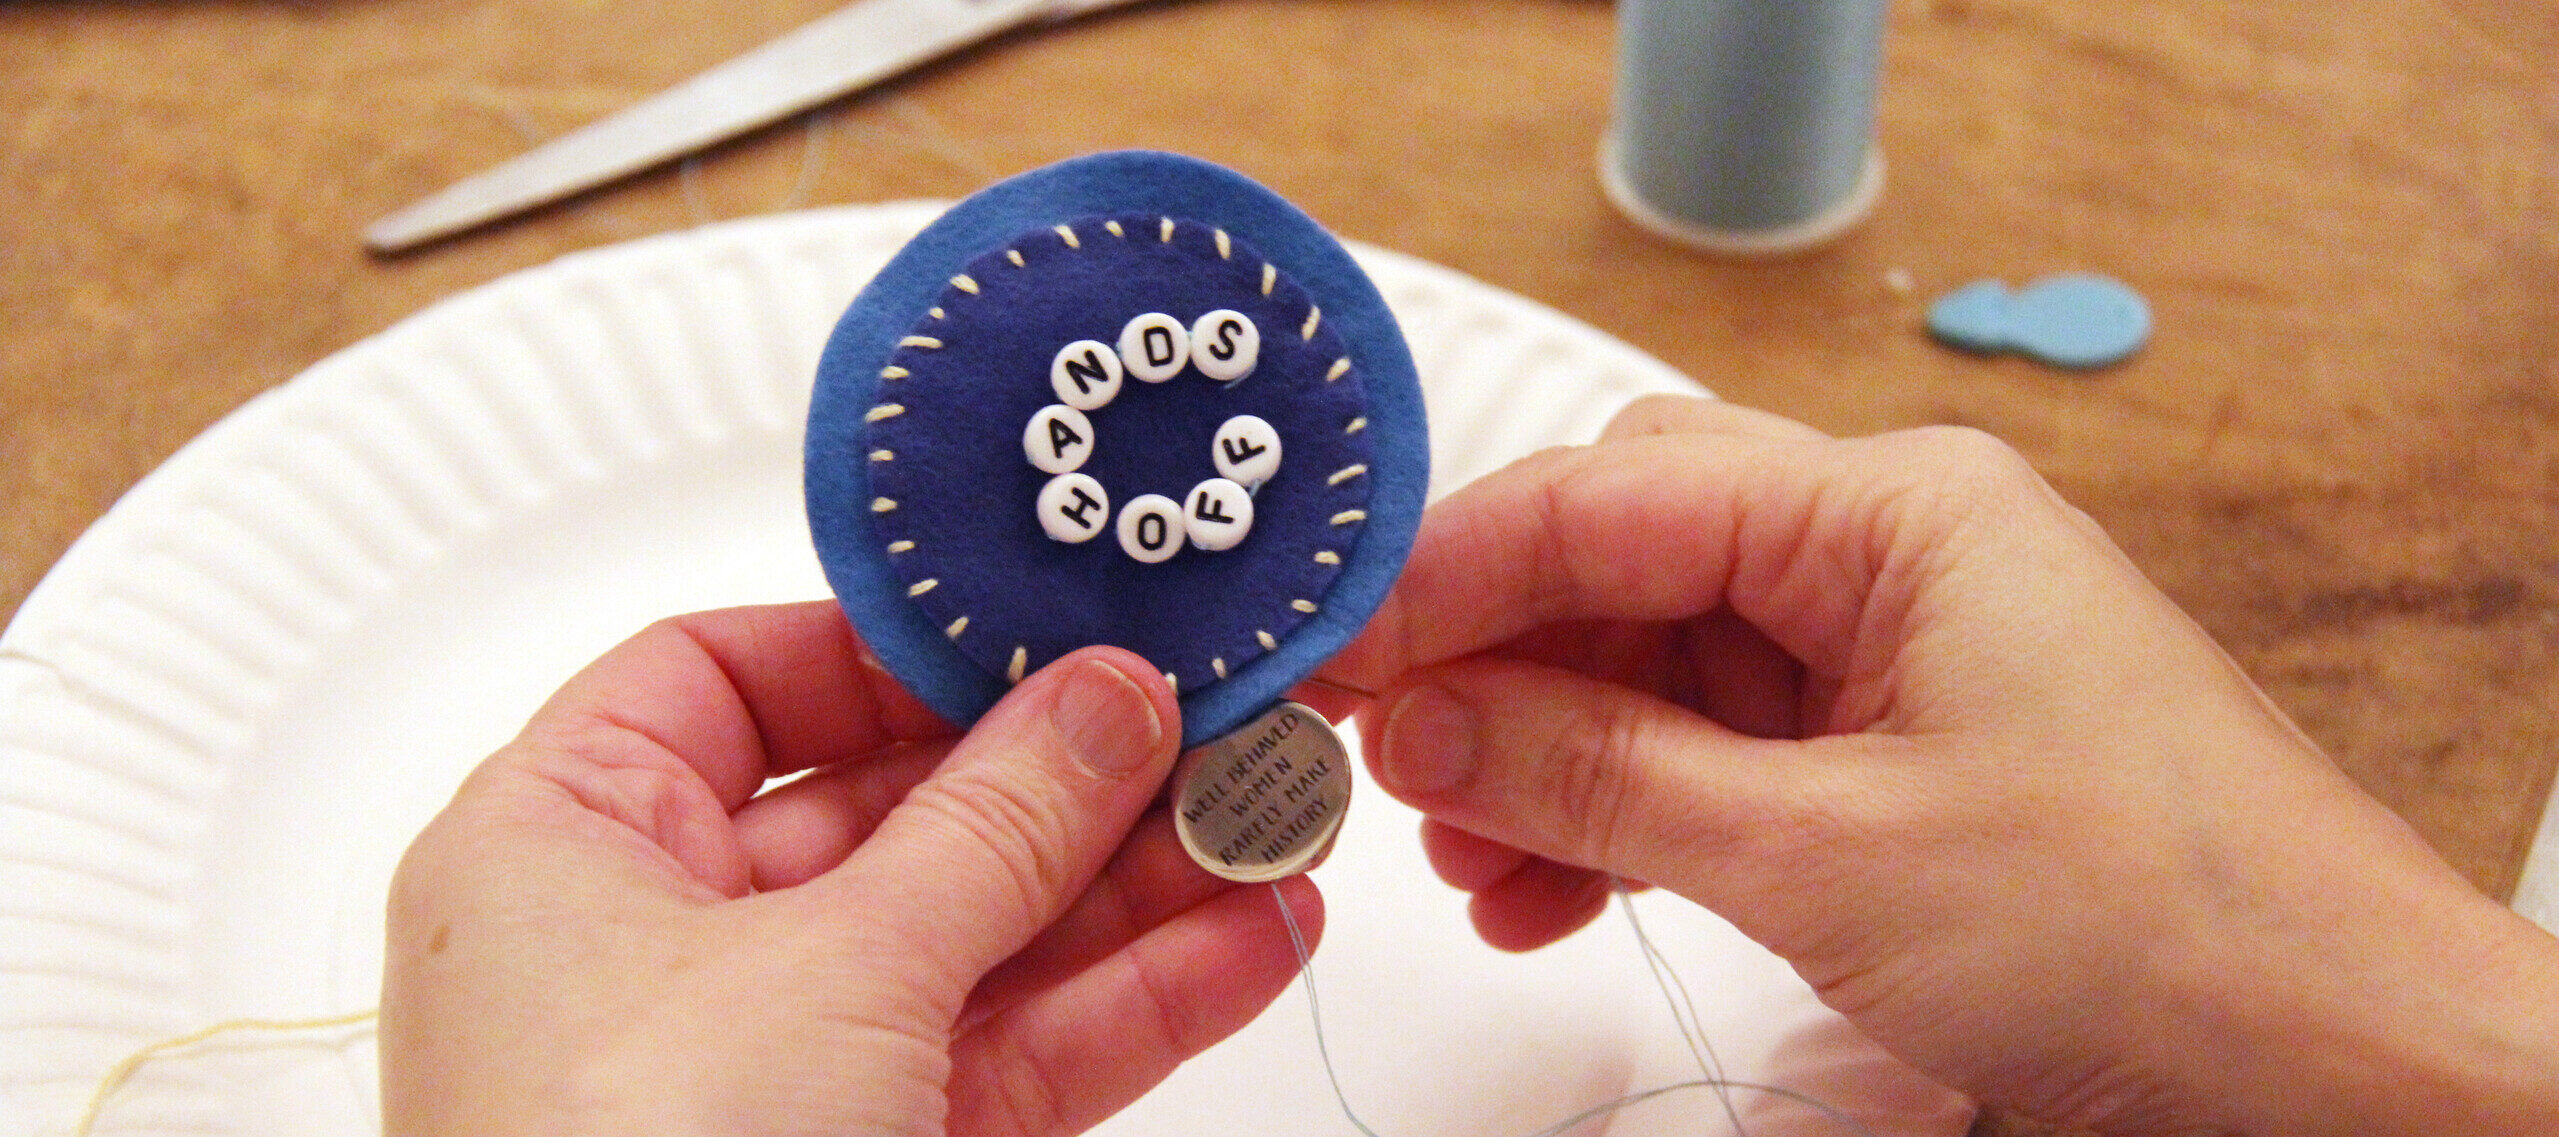 Close-up of a person's hands with light skin tone sewing a pin that reads “hands off.” In the background are scissors, a needle threader, and a spool of light blue thread.